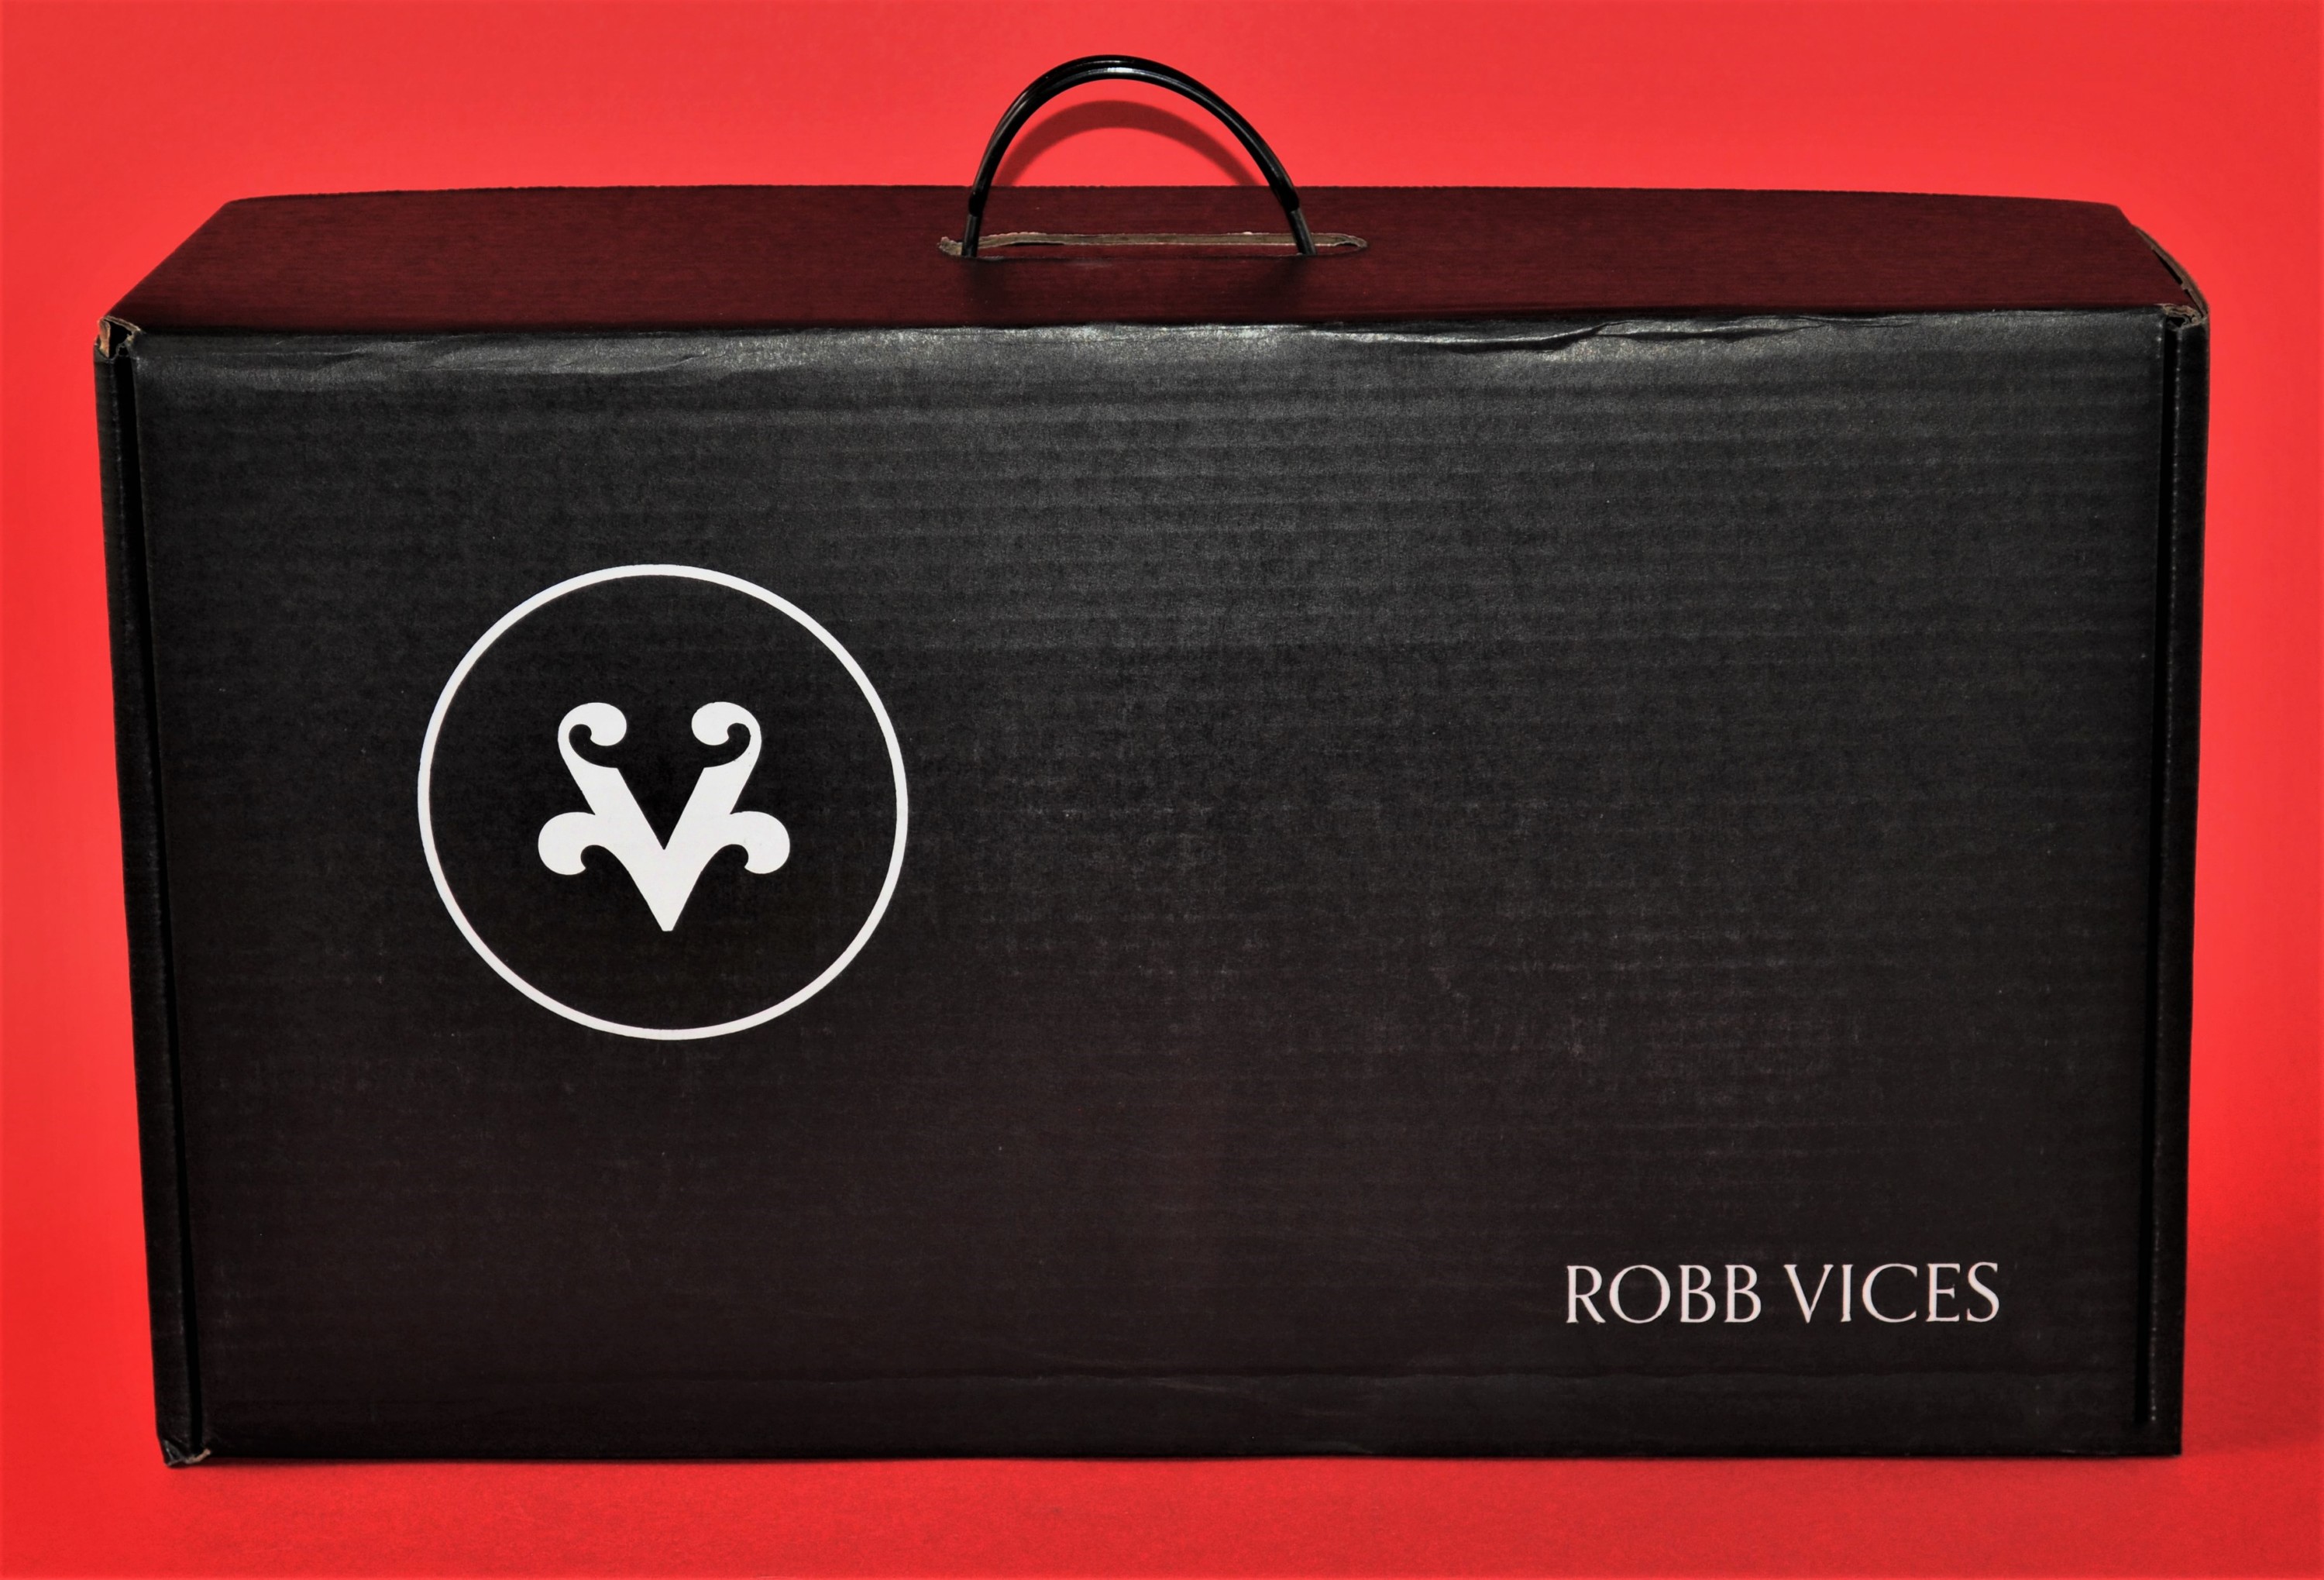 Robb Vices; Robb Vices Subscription; Robb Vices Box; Robb Vices Subscription Box; Subscription Box for Men; Vices; Robb Vices Review; Subscription Box Reviews;